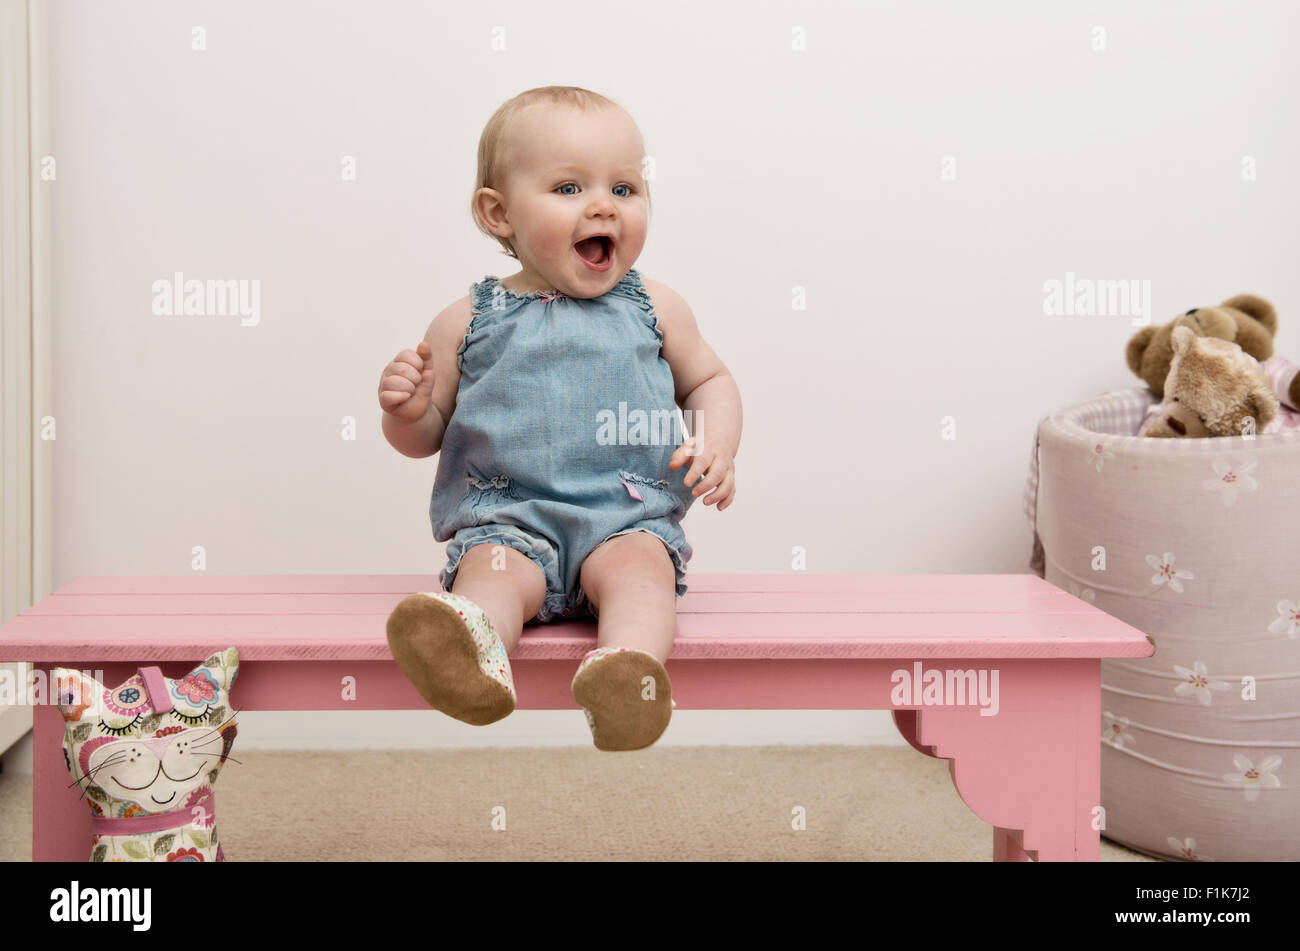 Laughing infant sitting on a pink bench, looking at camera Stock Photo